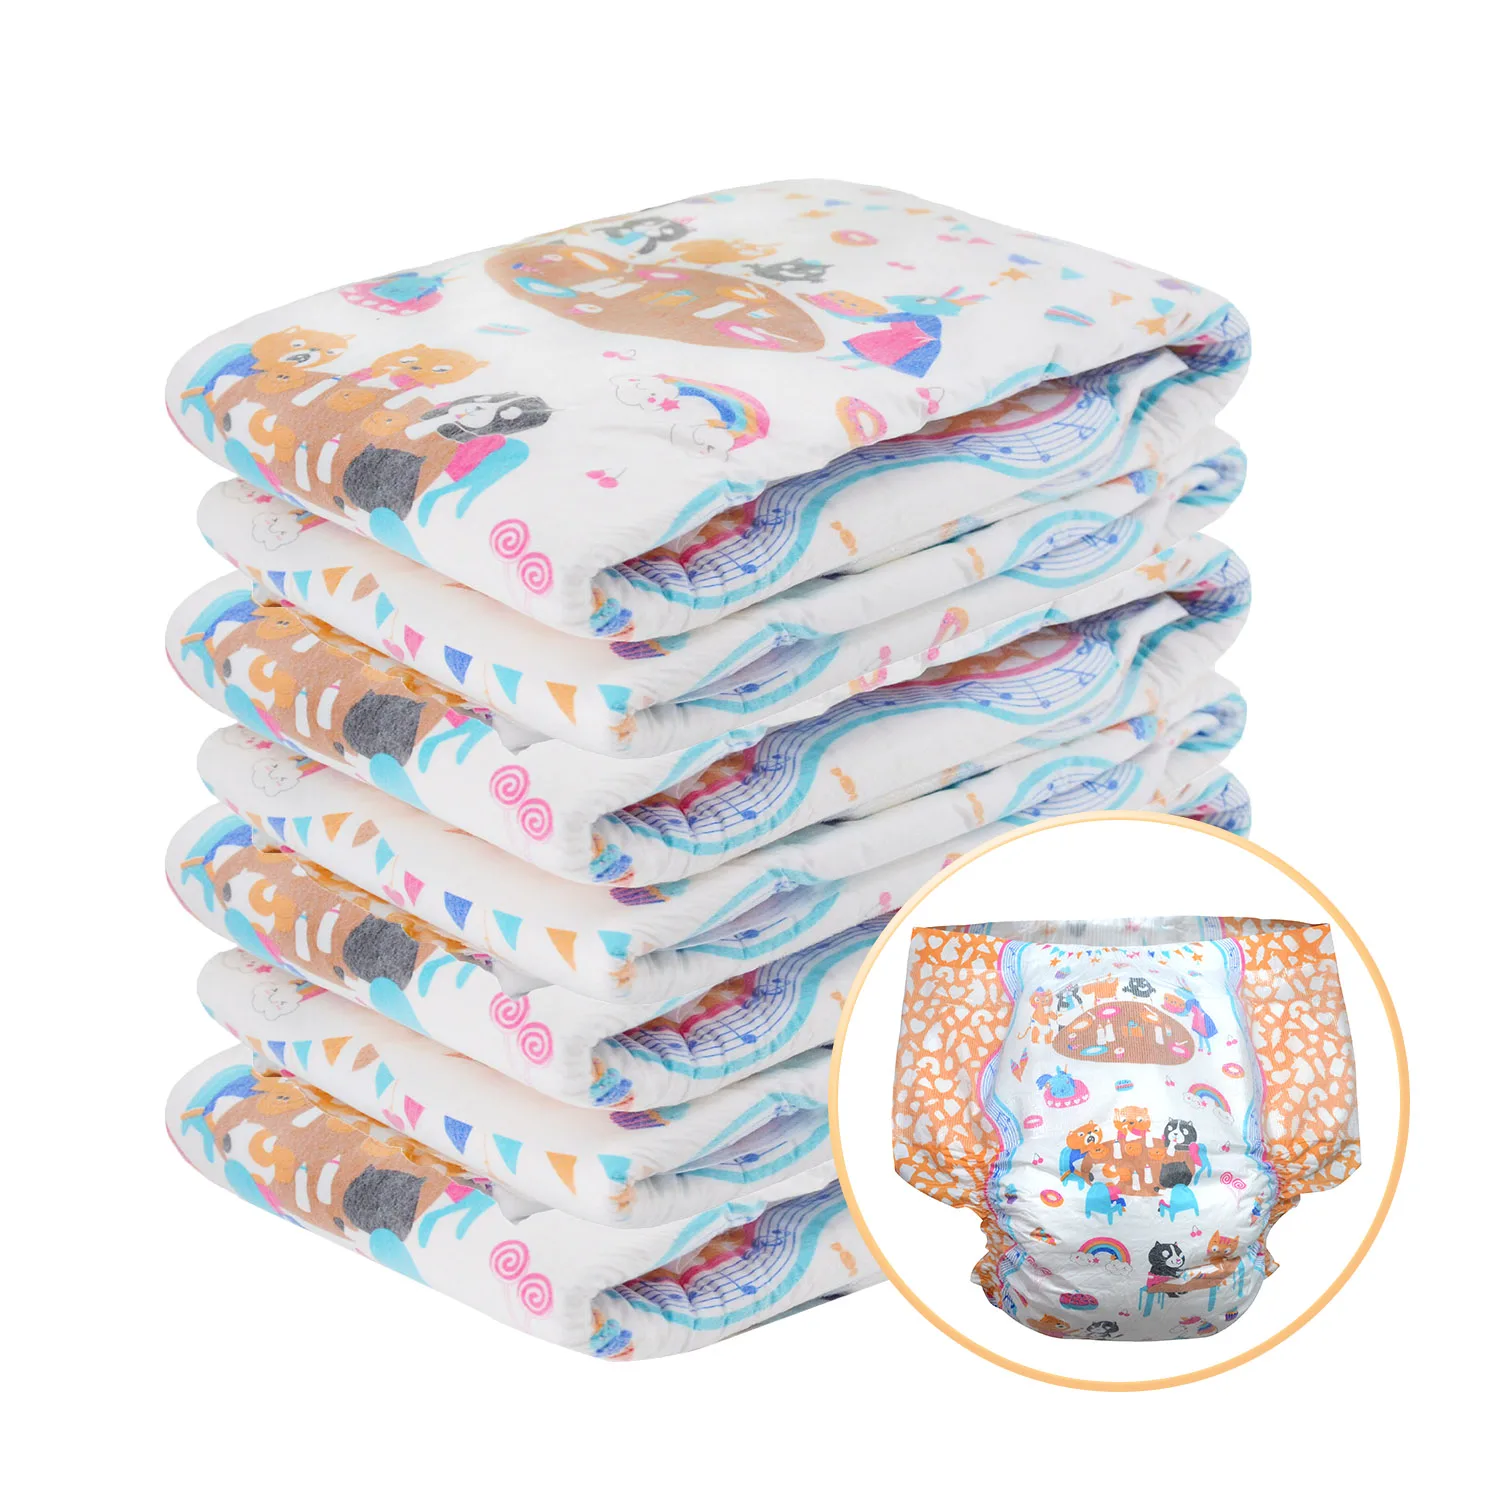 7pcs abdl Adult Baby diapers Large Size Rainbow Week Diaper 6000ml Absorbtive DDLG disposable diapers daddy Dummy holder Dom